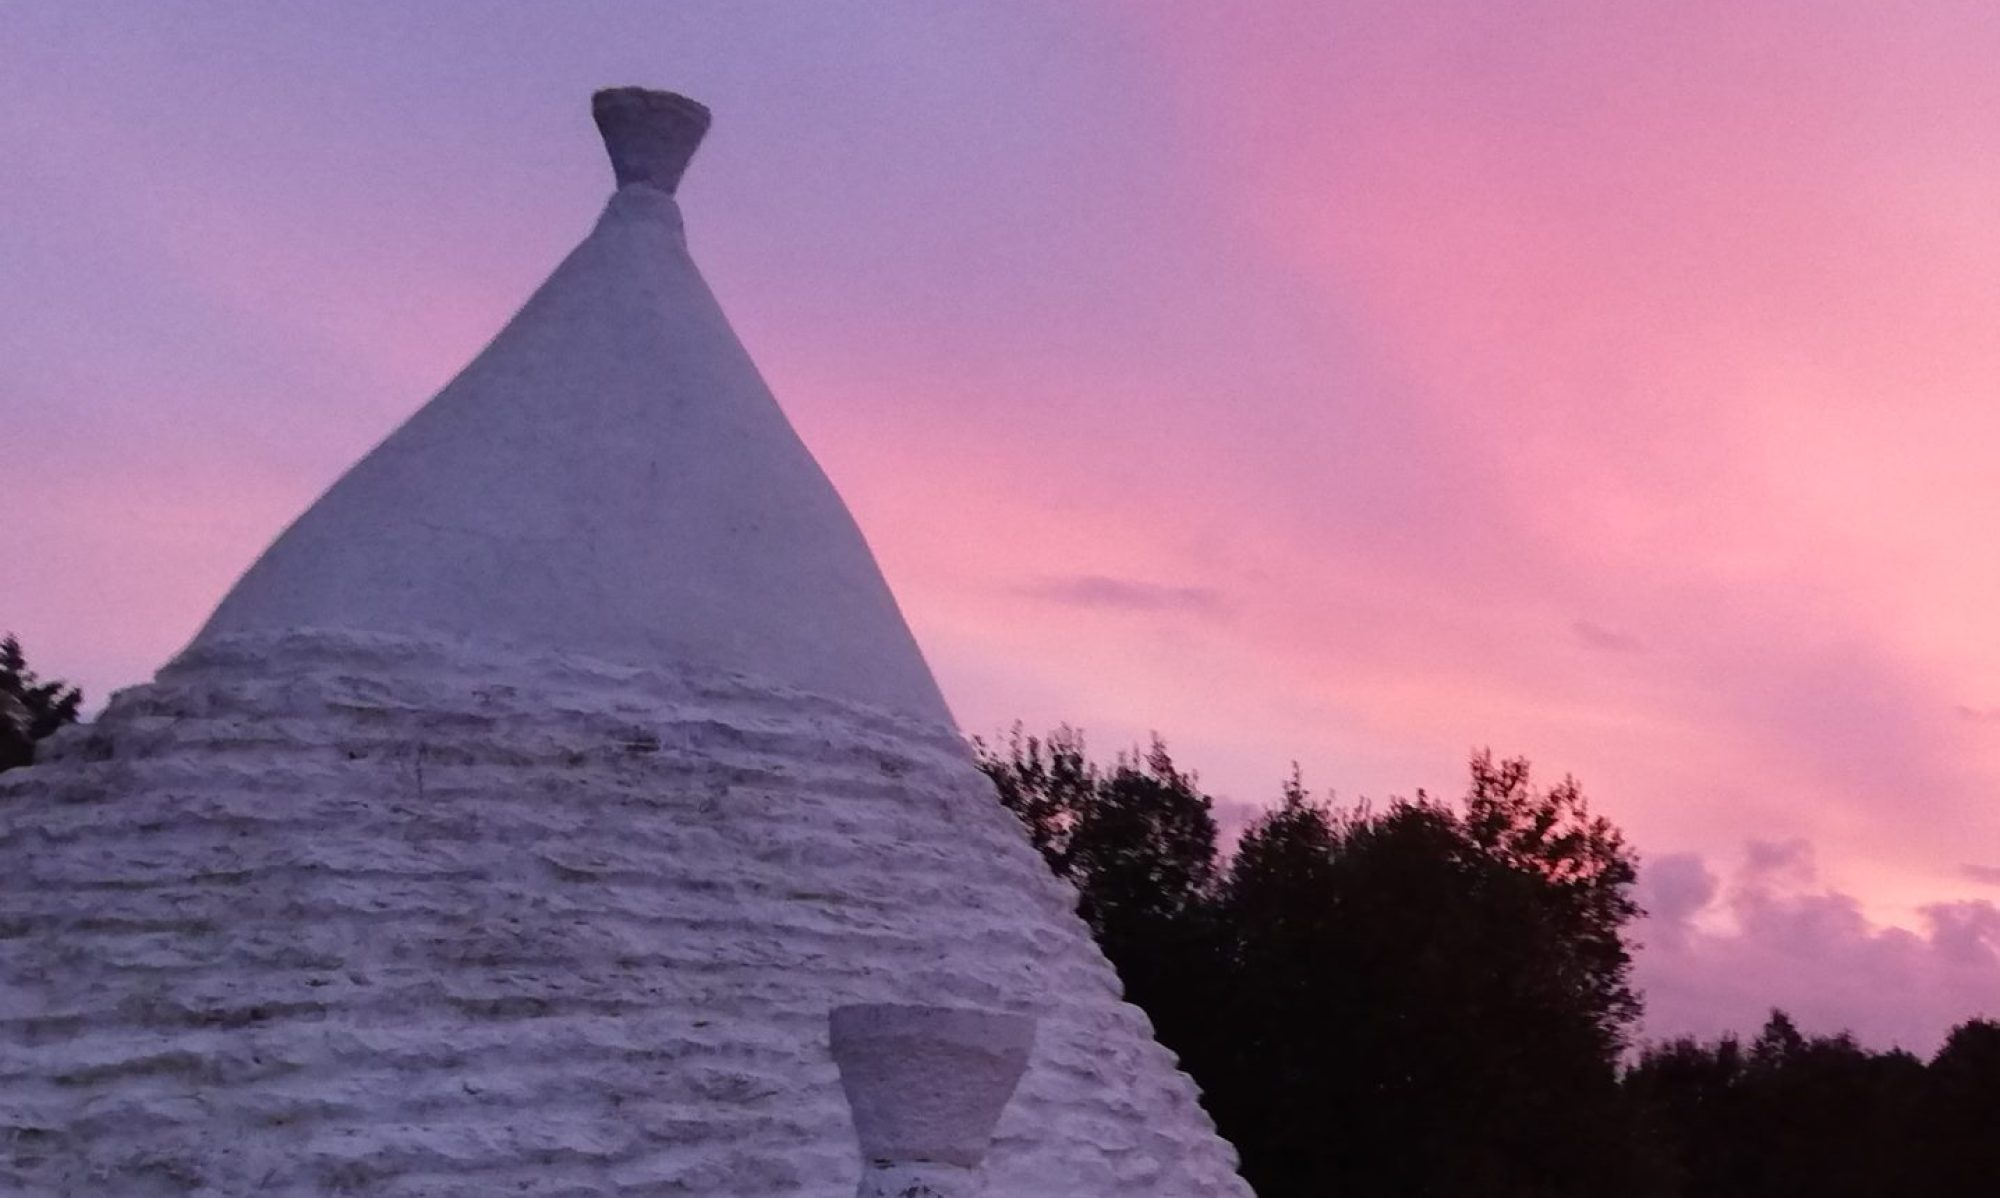 our trulli house